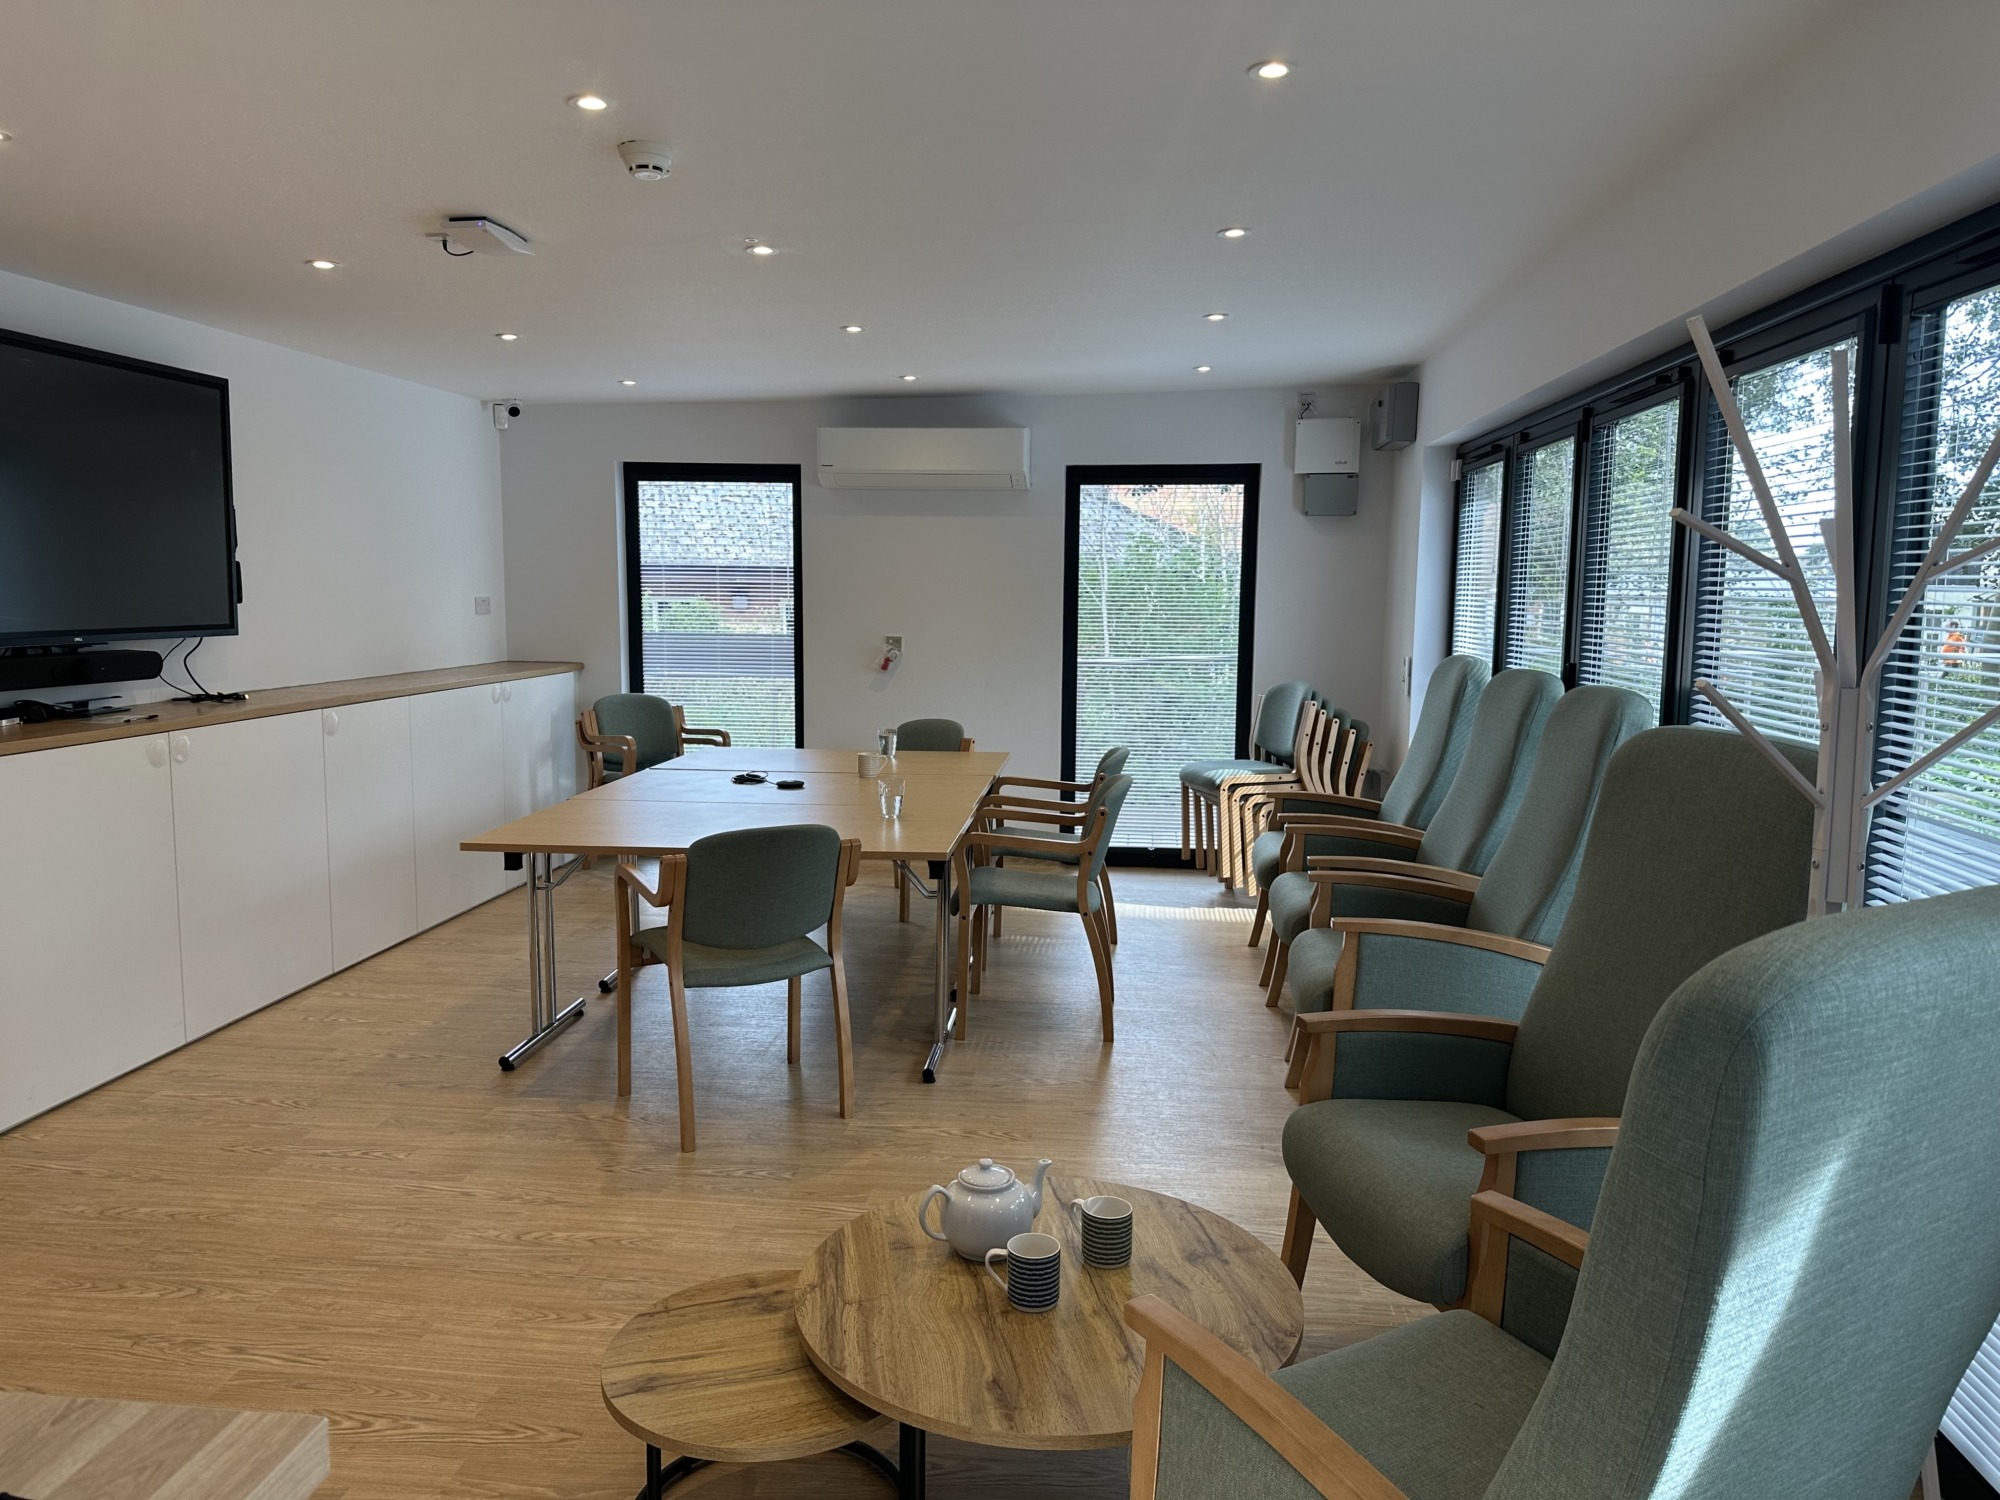 New Woodlands Room brings the outside in at hospice | Northamptonshire Chamber of Commerce